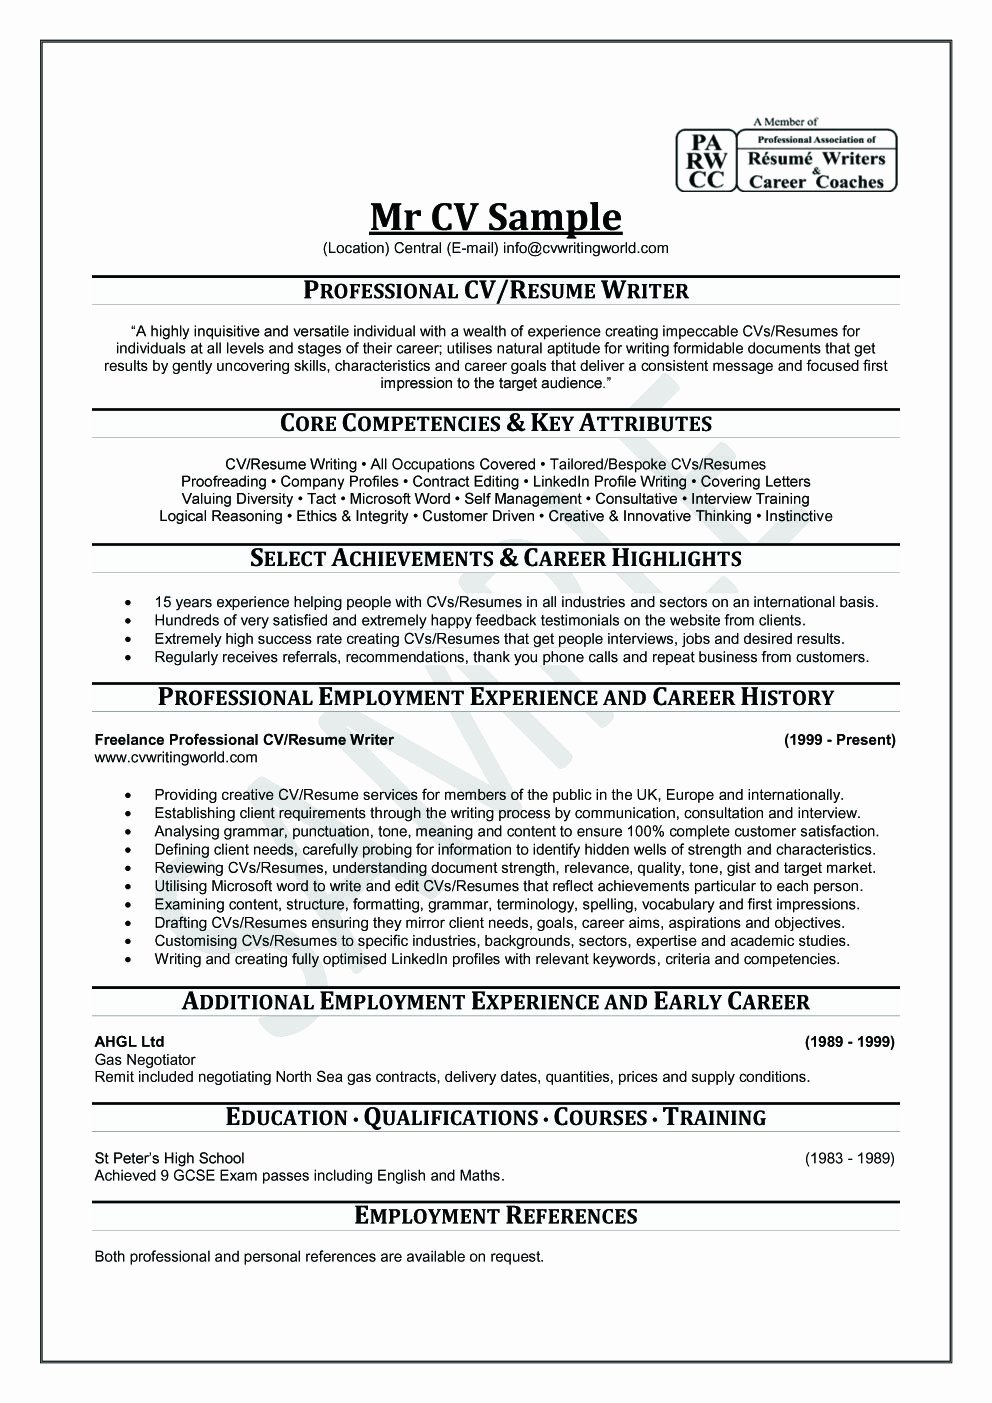 How to Write A Professional Resume